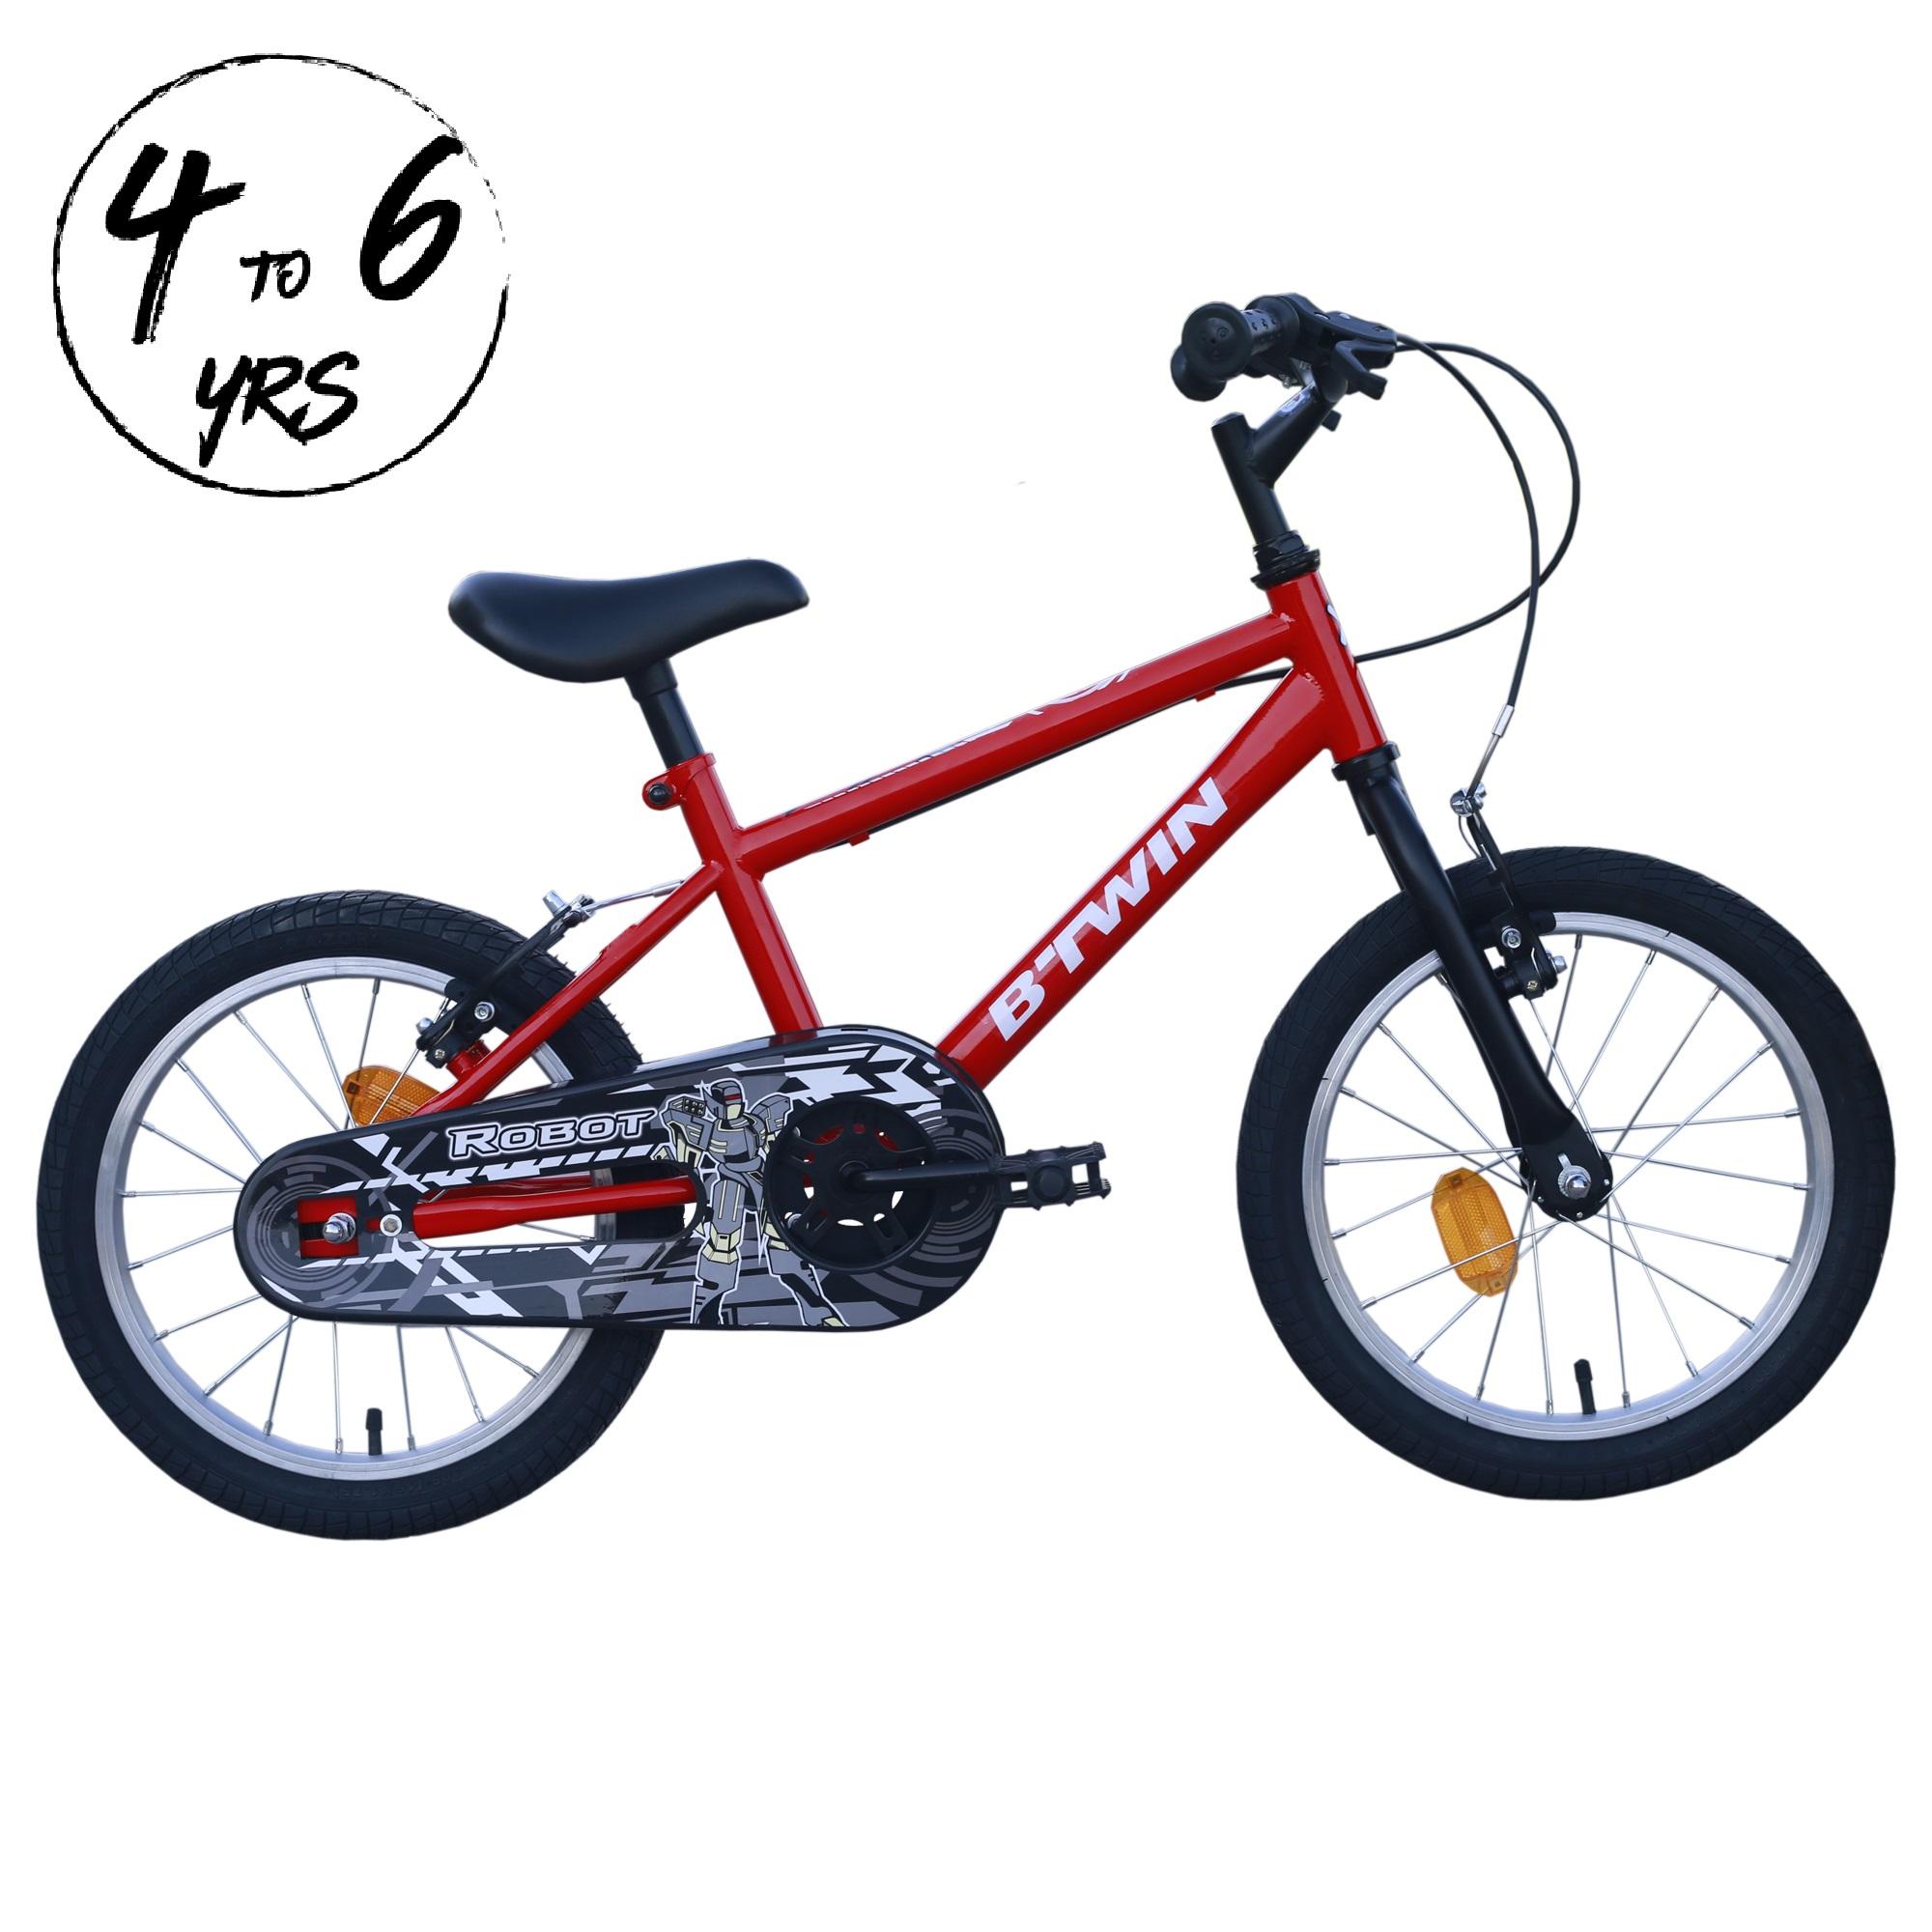 cycle for kids low price